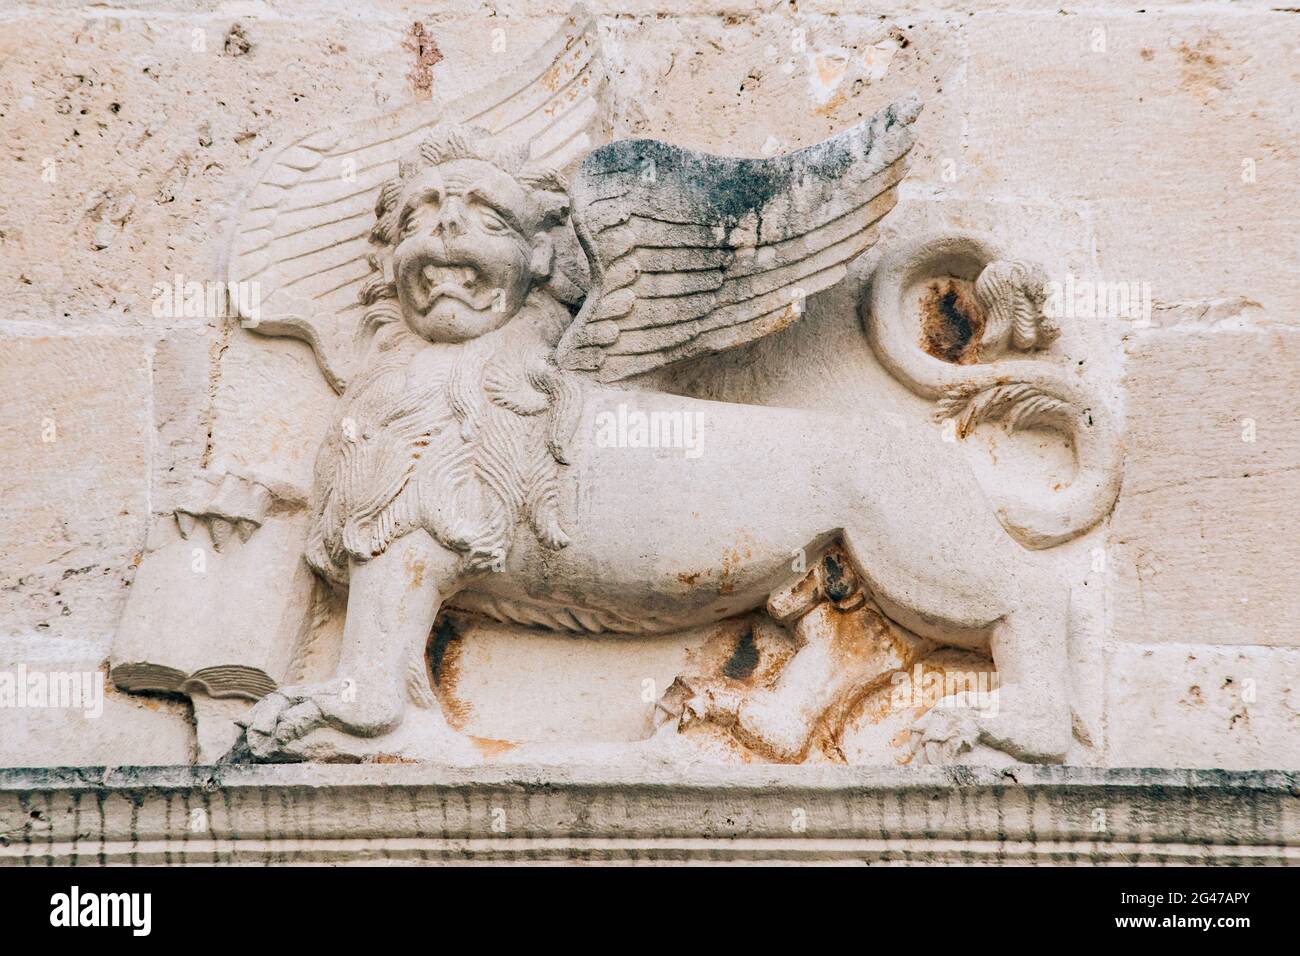 A bas-relief on the wall depicting a mythical lion with wings and a book in its paws. Stock Photo